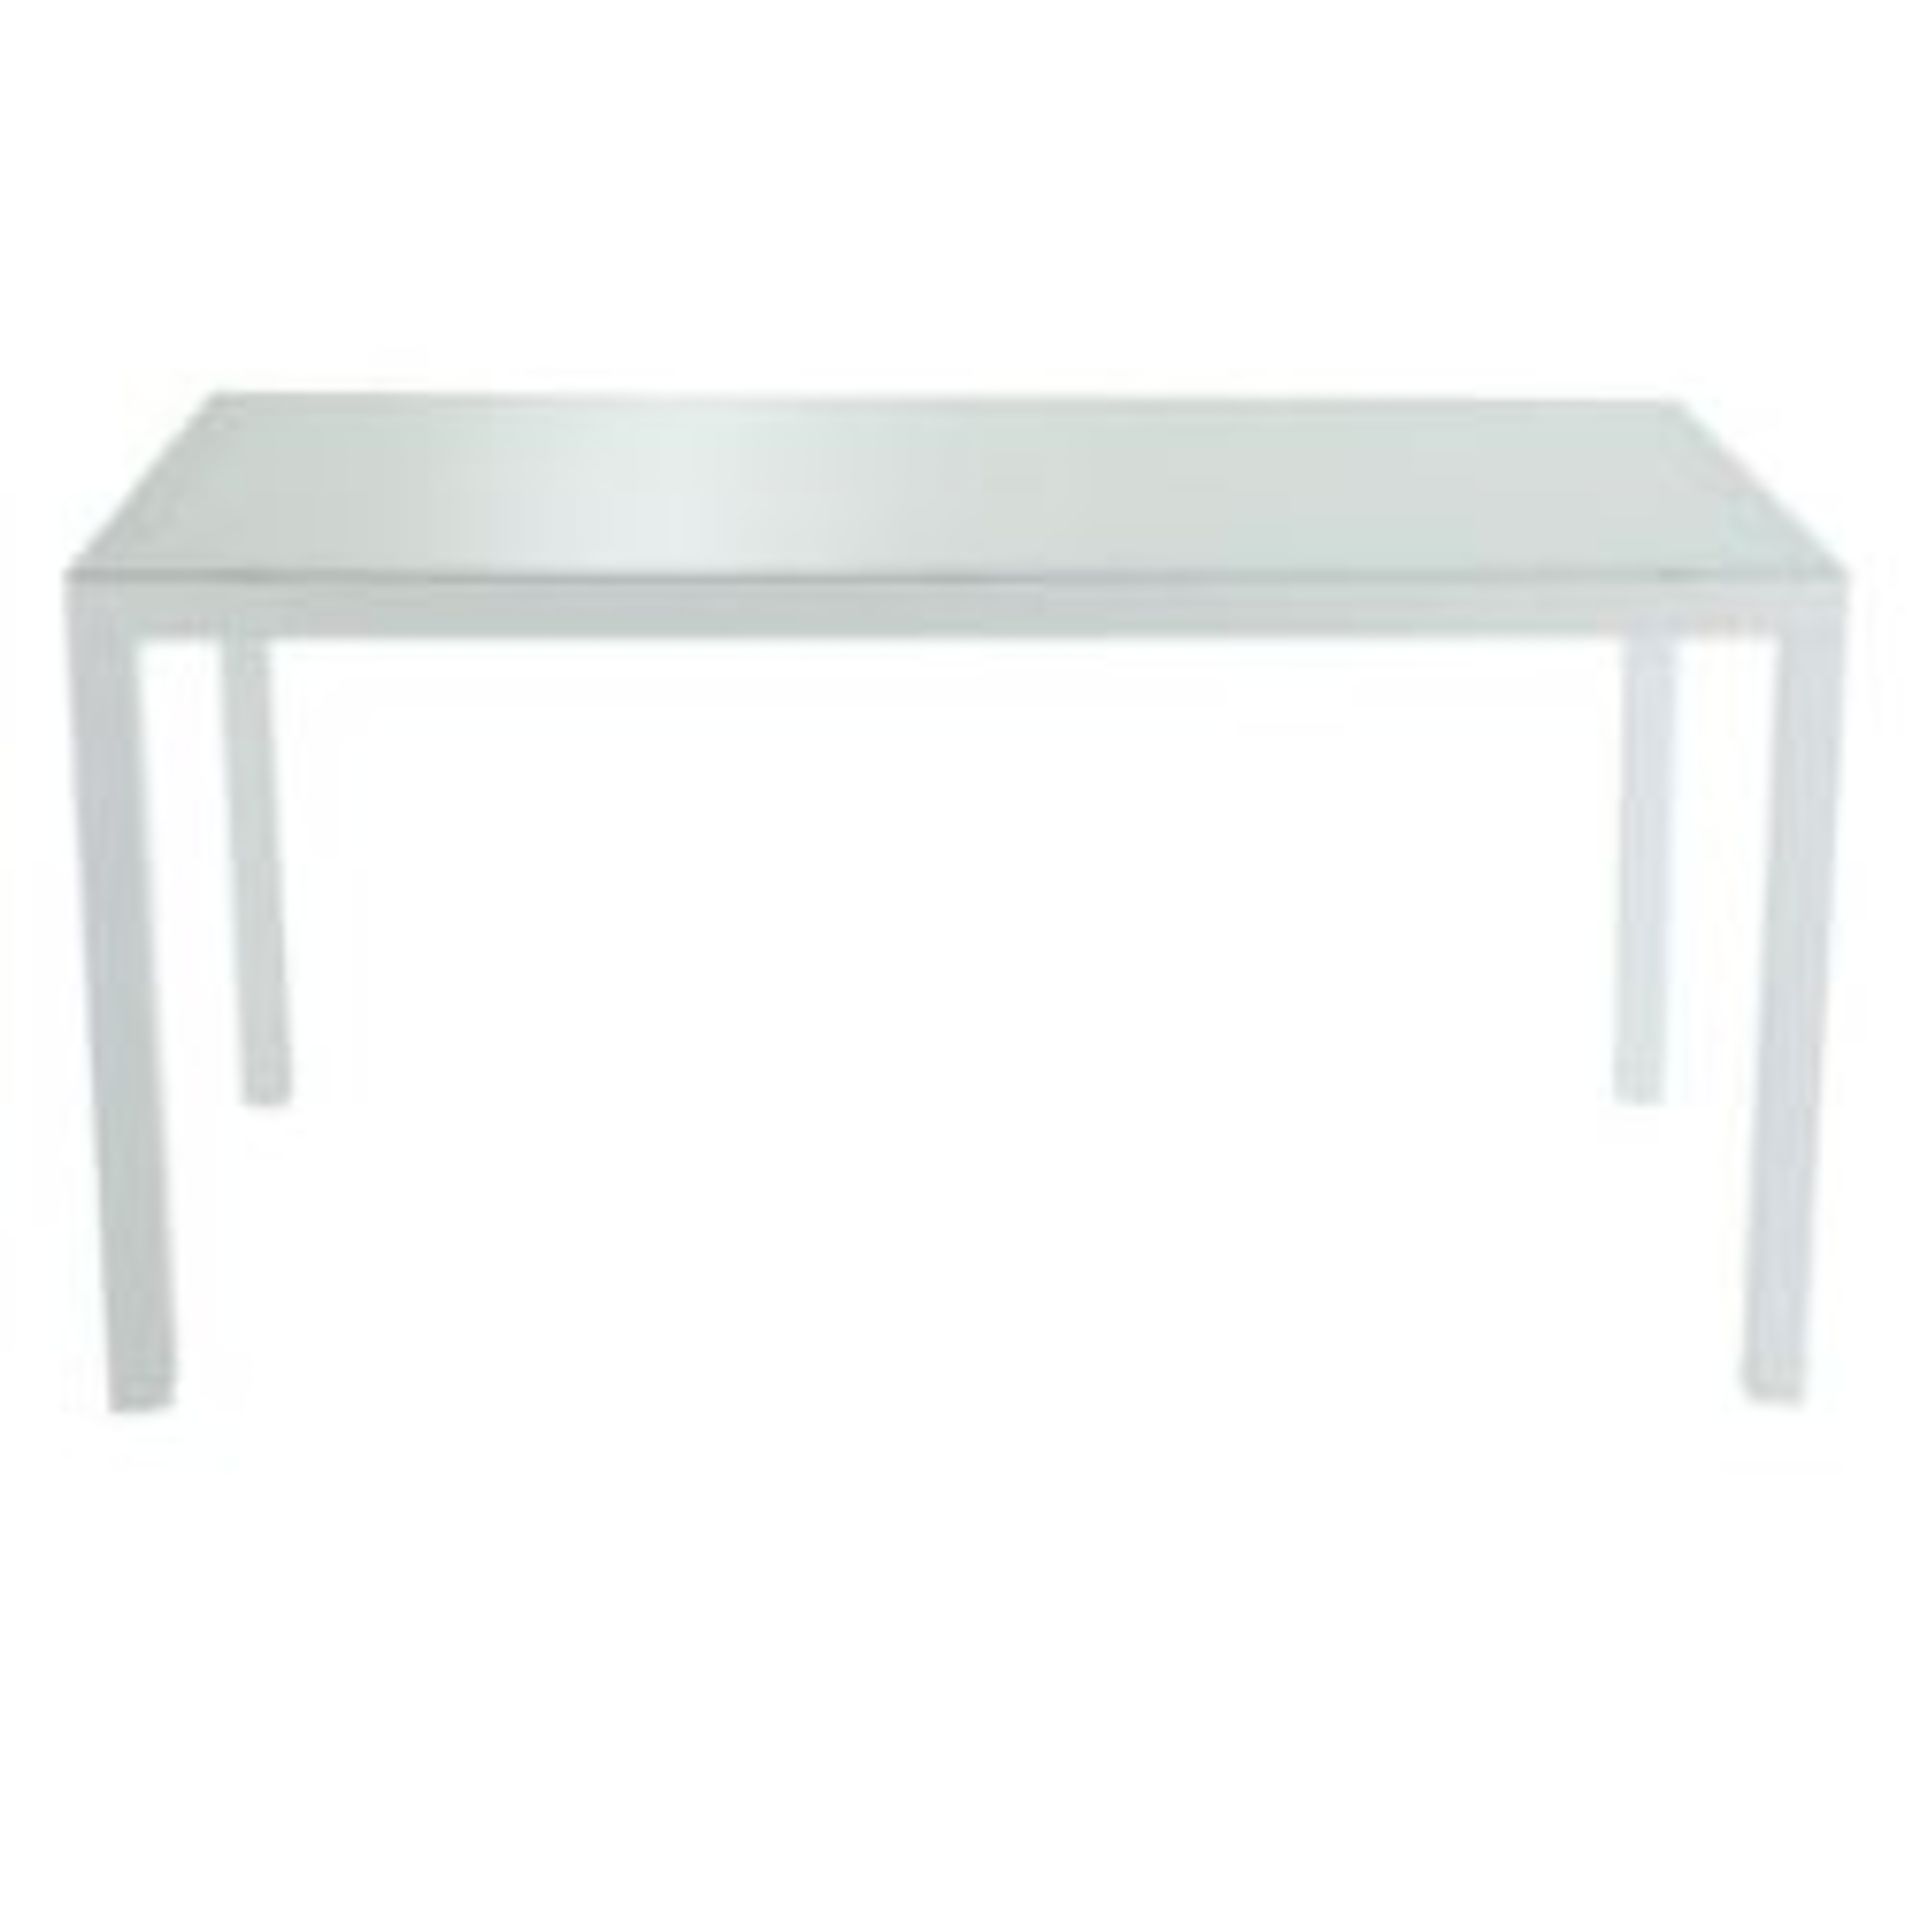 Blooma Atlantic table, powder coated aluminium with 5 mm tempered glass top - RRP £85 - Image 4 of 4